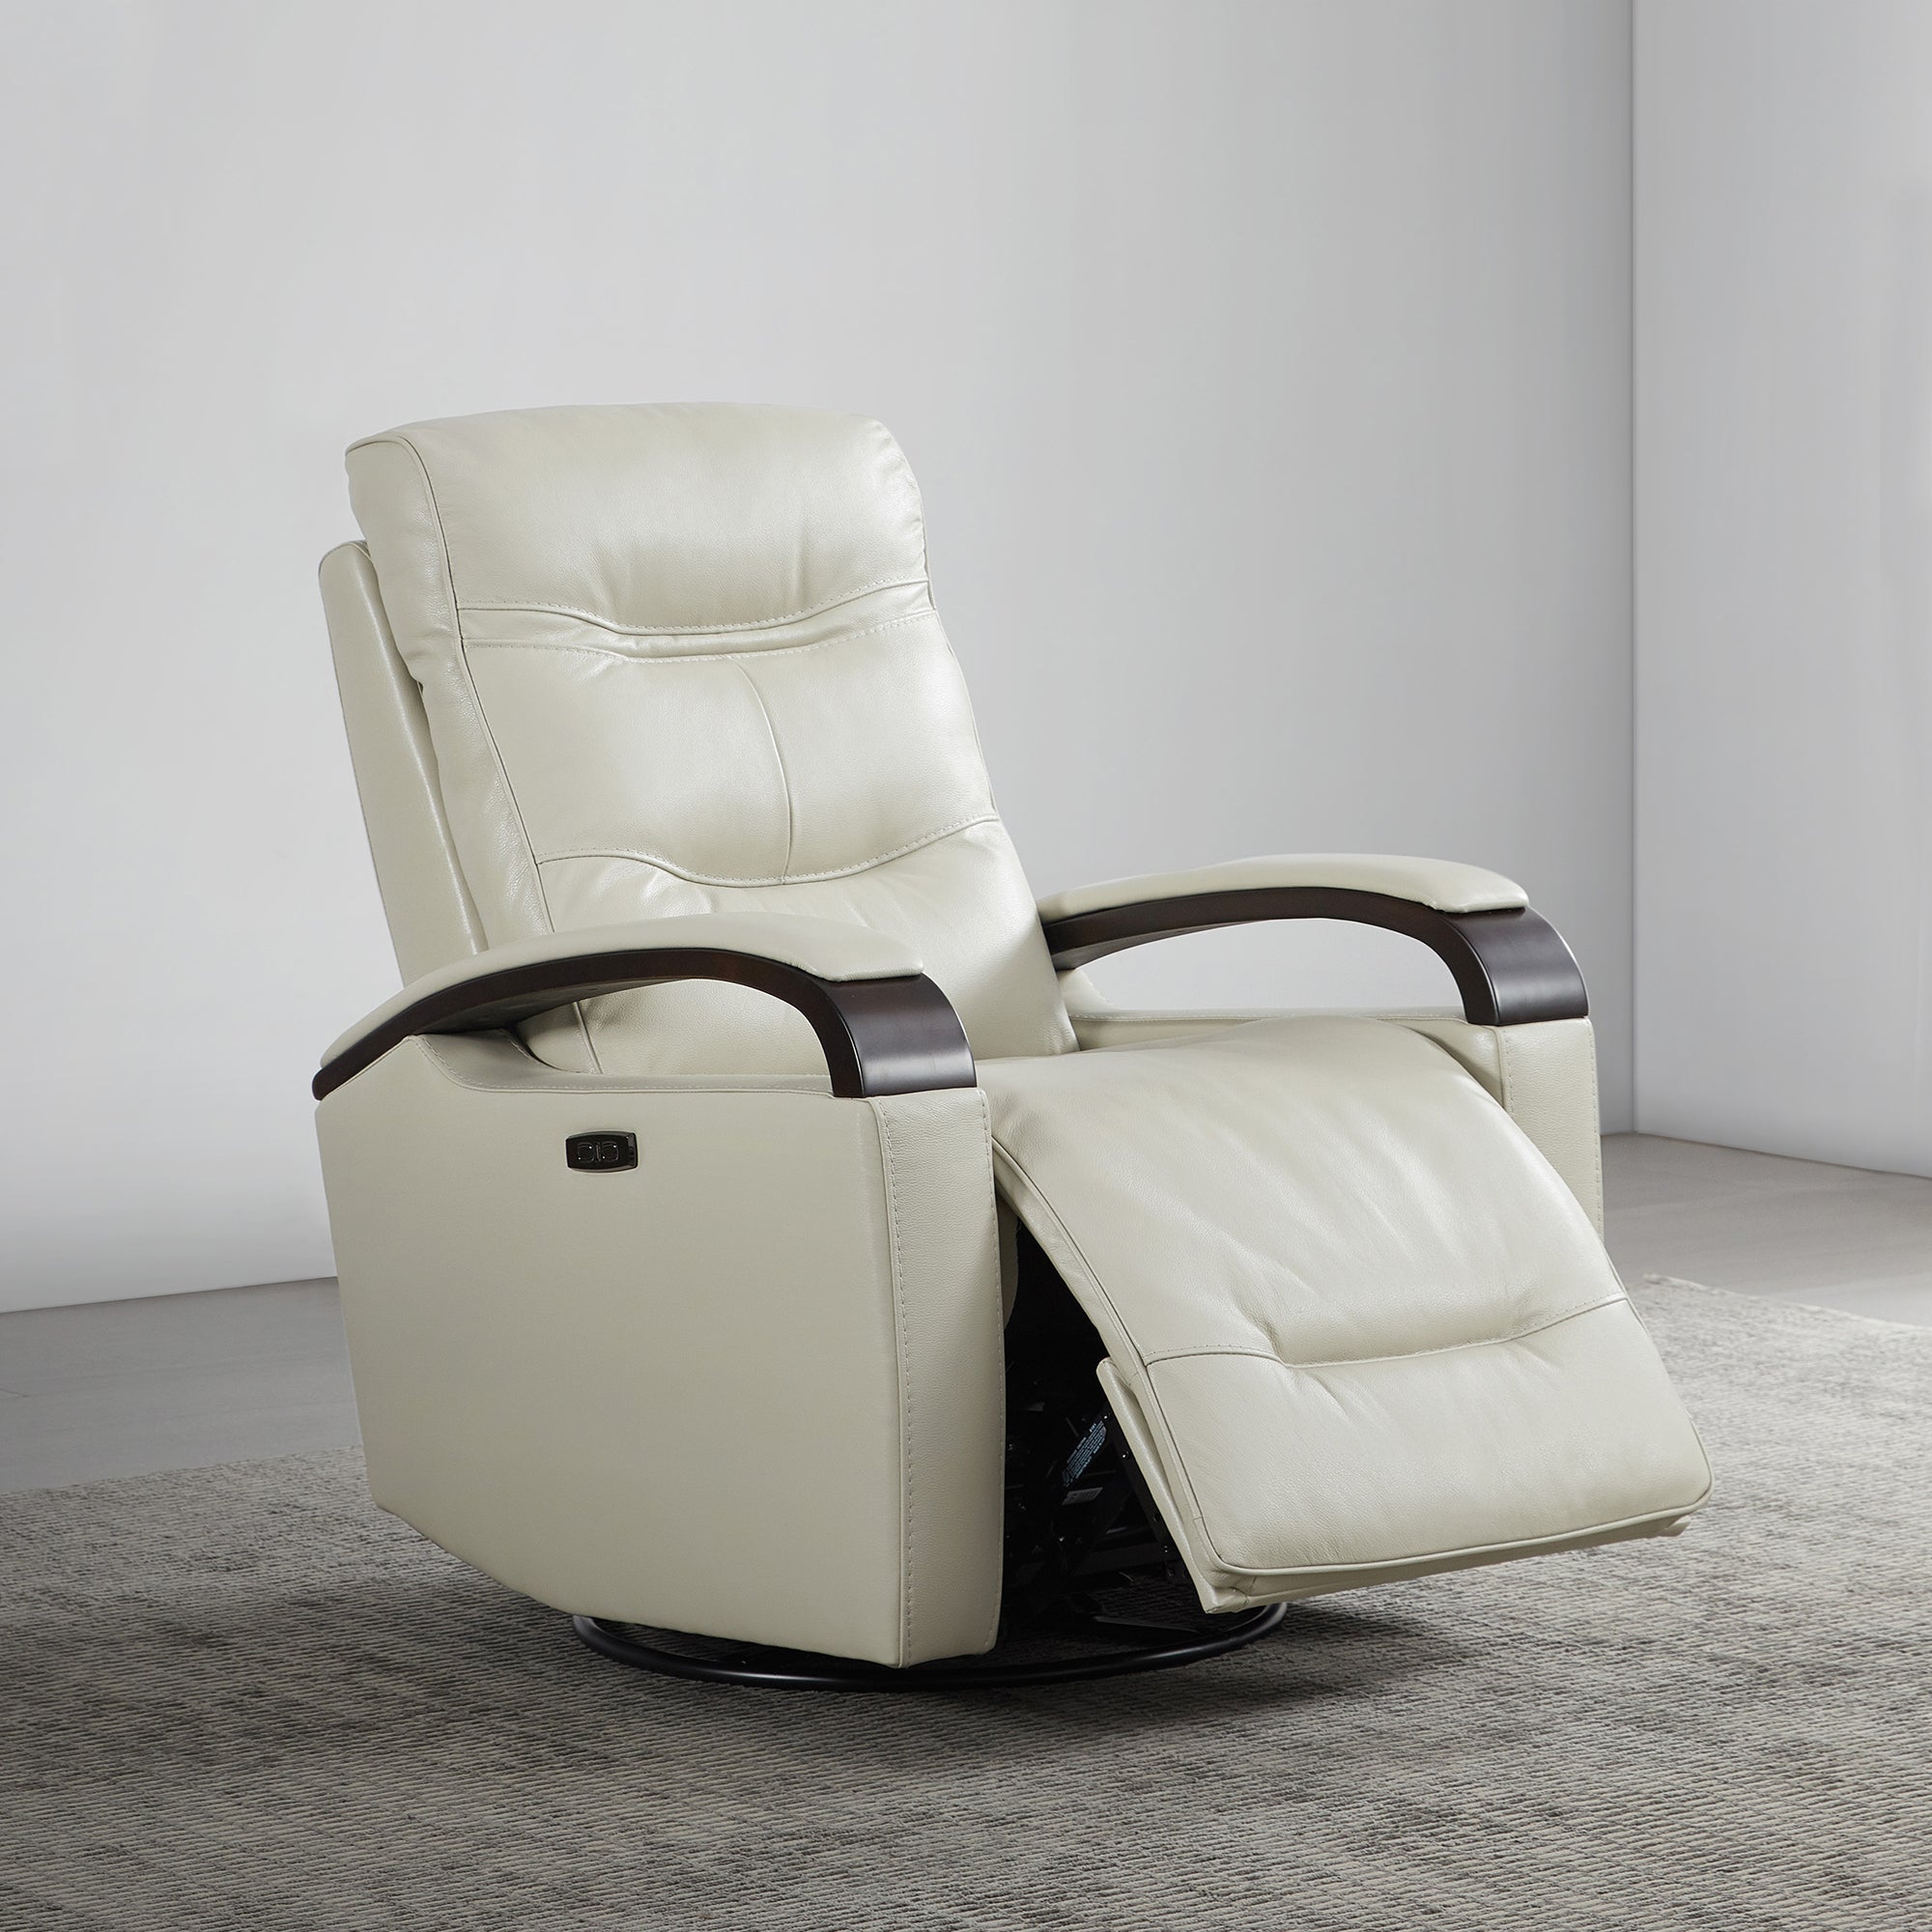 CHITA LIVING-Gentry Leather Power Swivel Glider Recliner with USB Charge-Recliners-Genuine Leather-Light Gray-